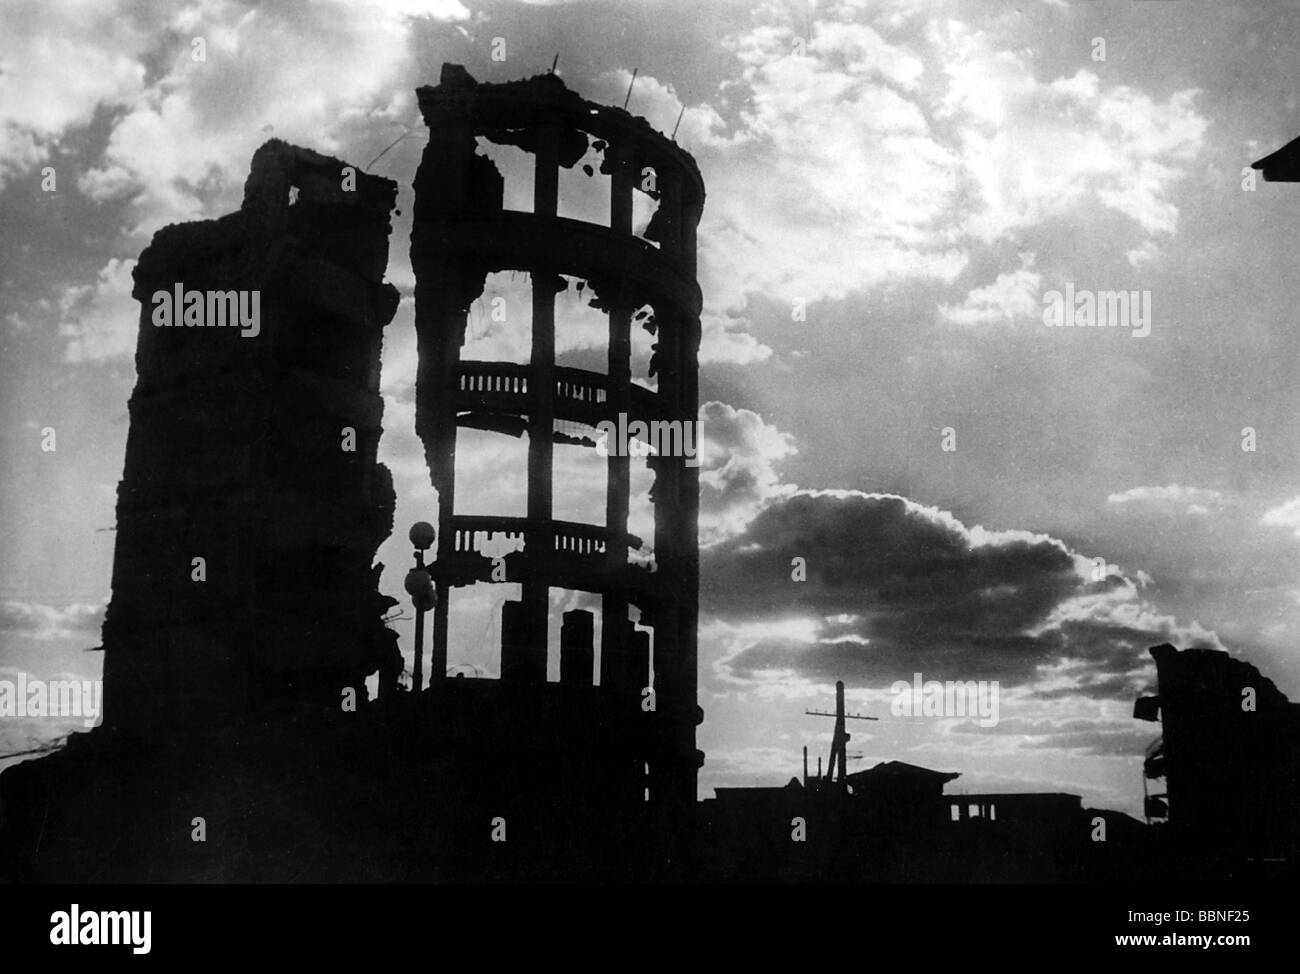 events, Second World War / WWII, Russia, Stalingrad 1942 / 1943, Stock Photo